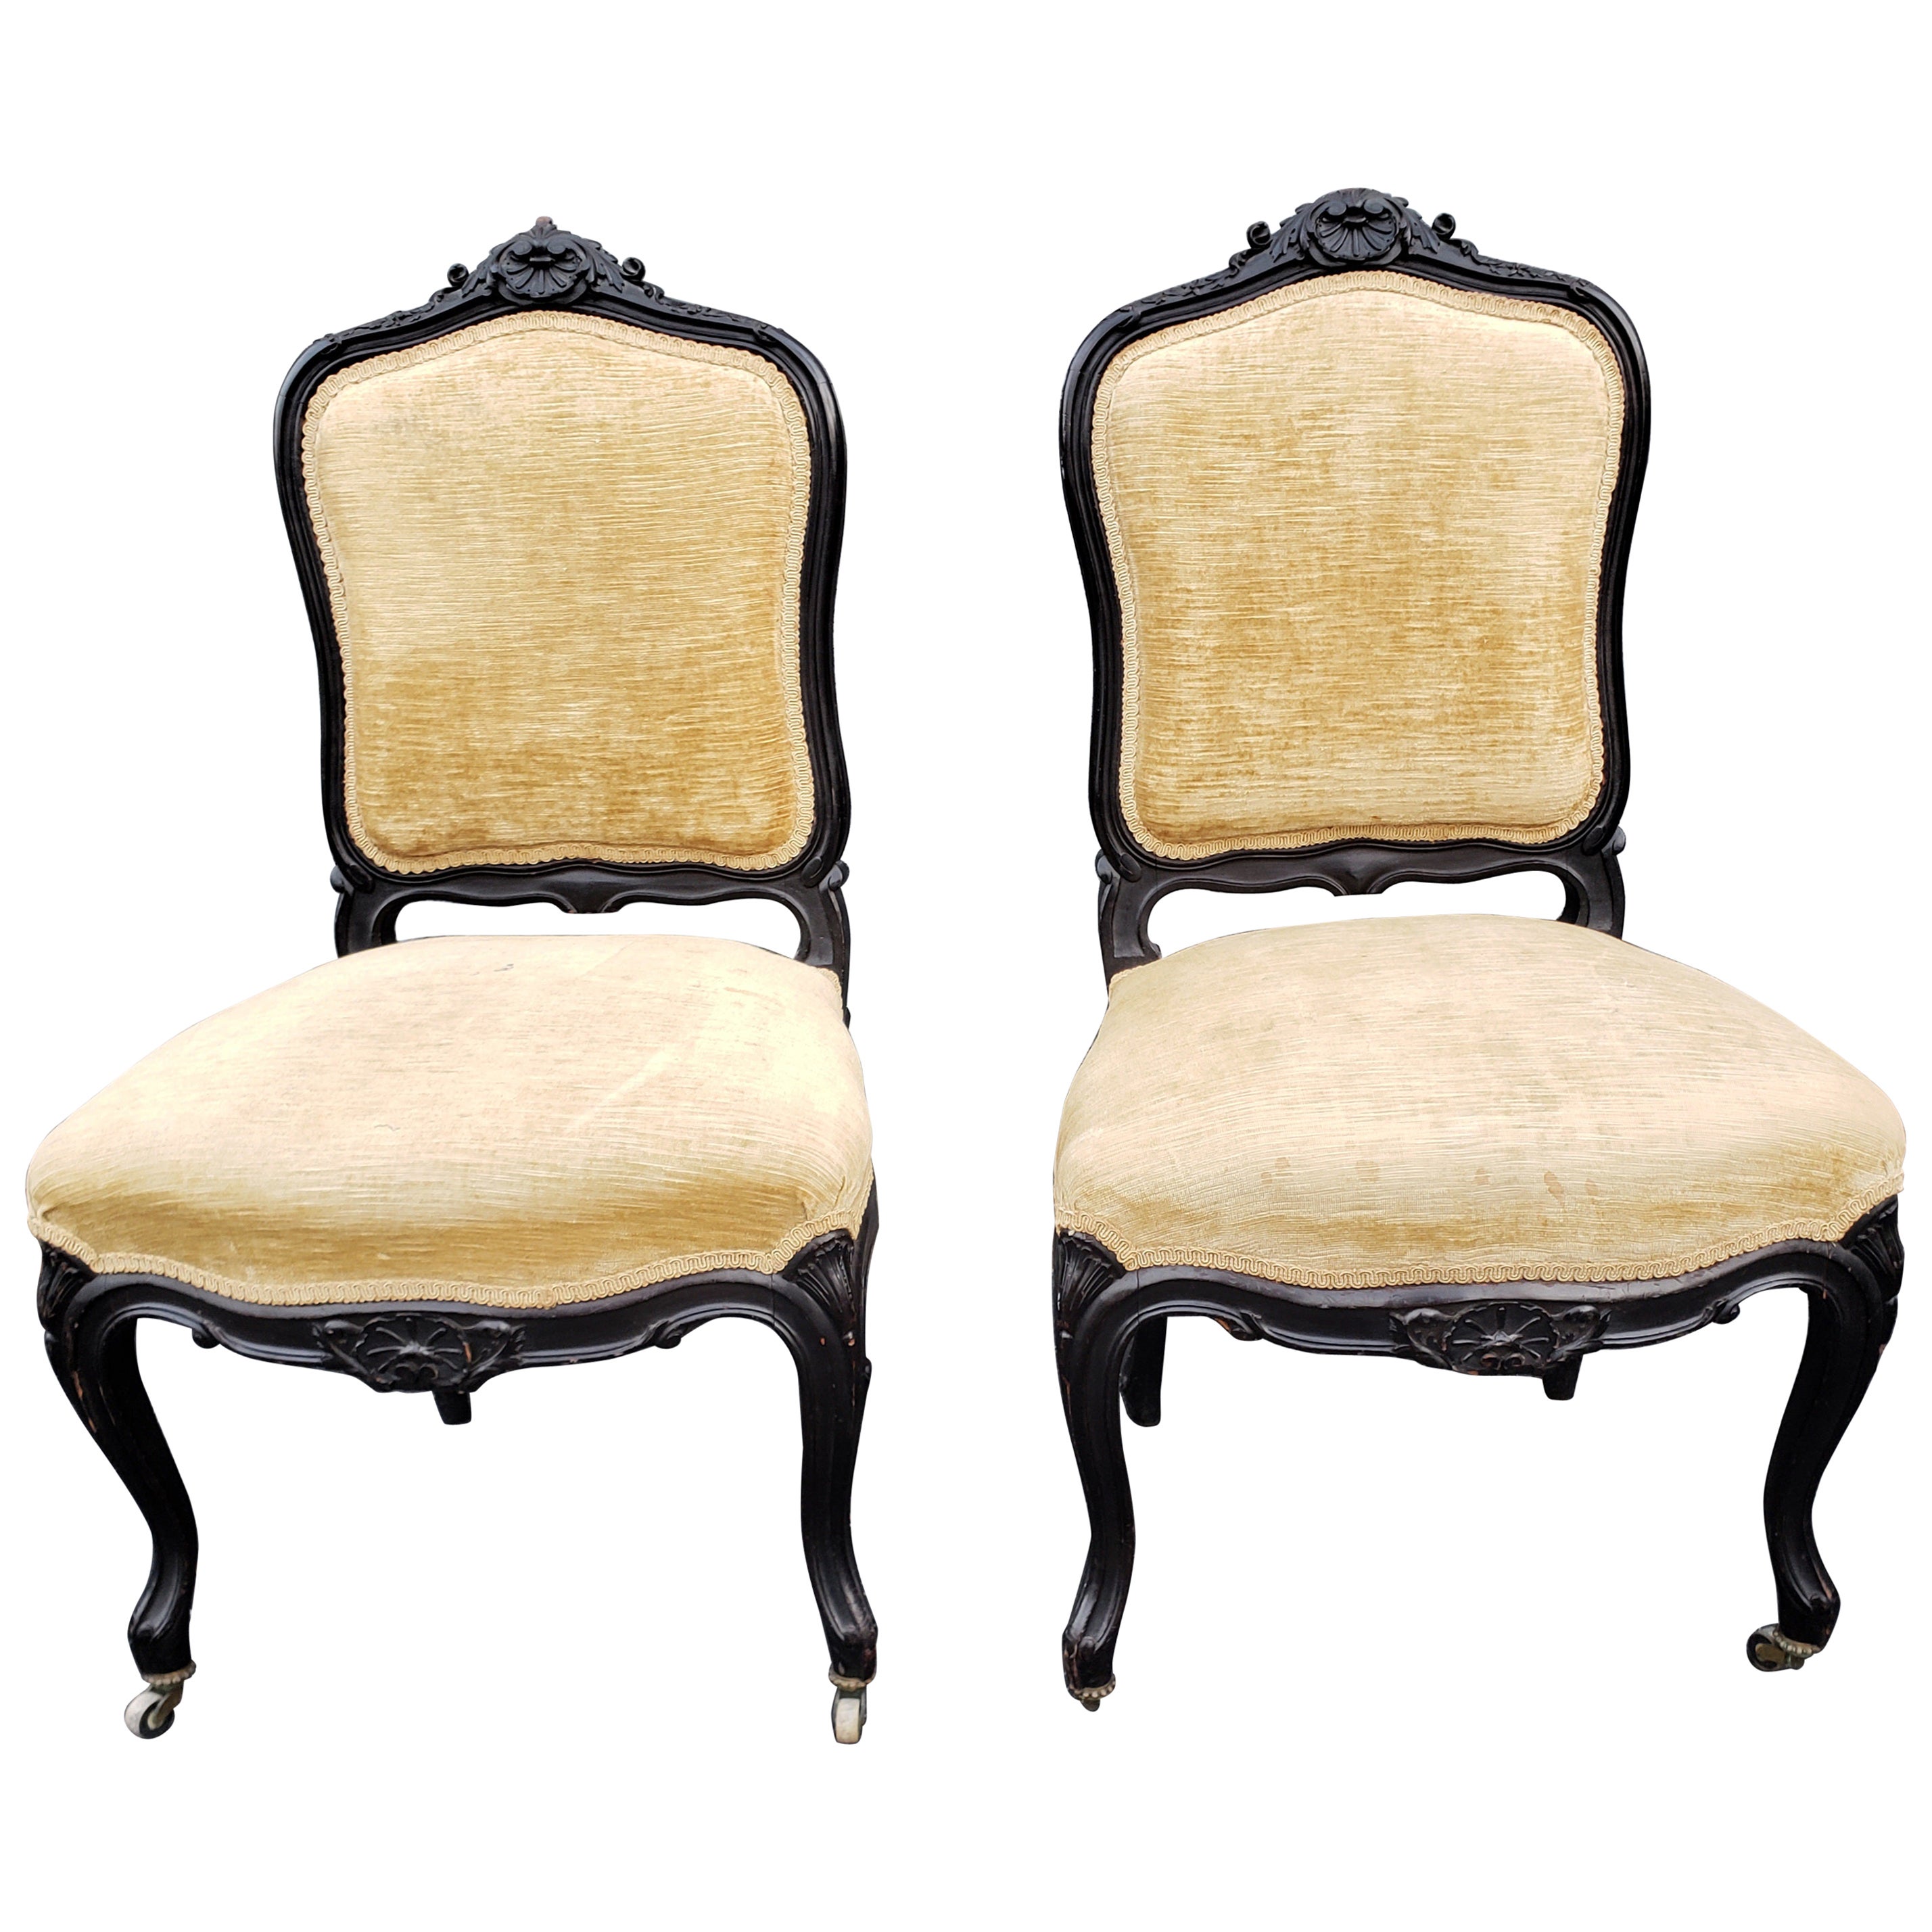 Pair of 1890s Louis XV Carved, Ebonized and Upholstered Chairs For Sale